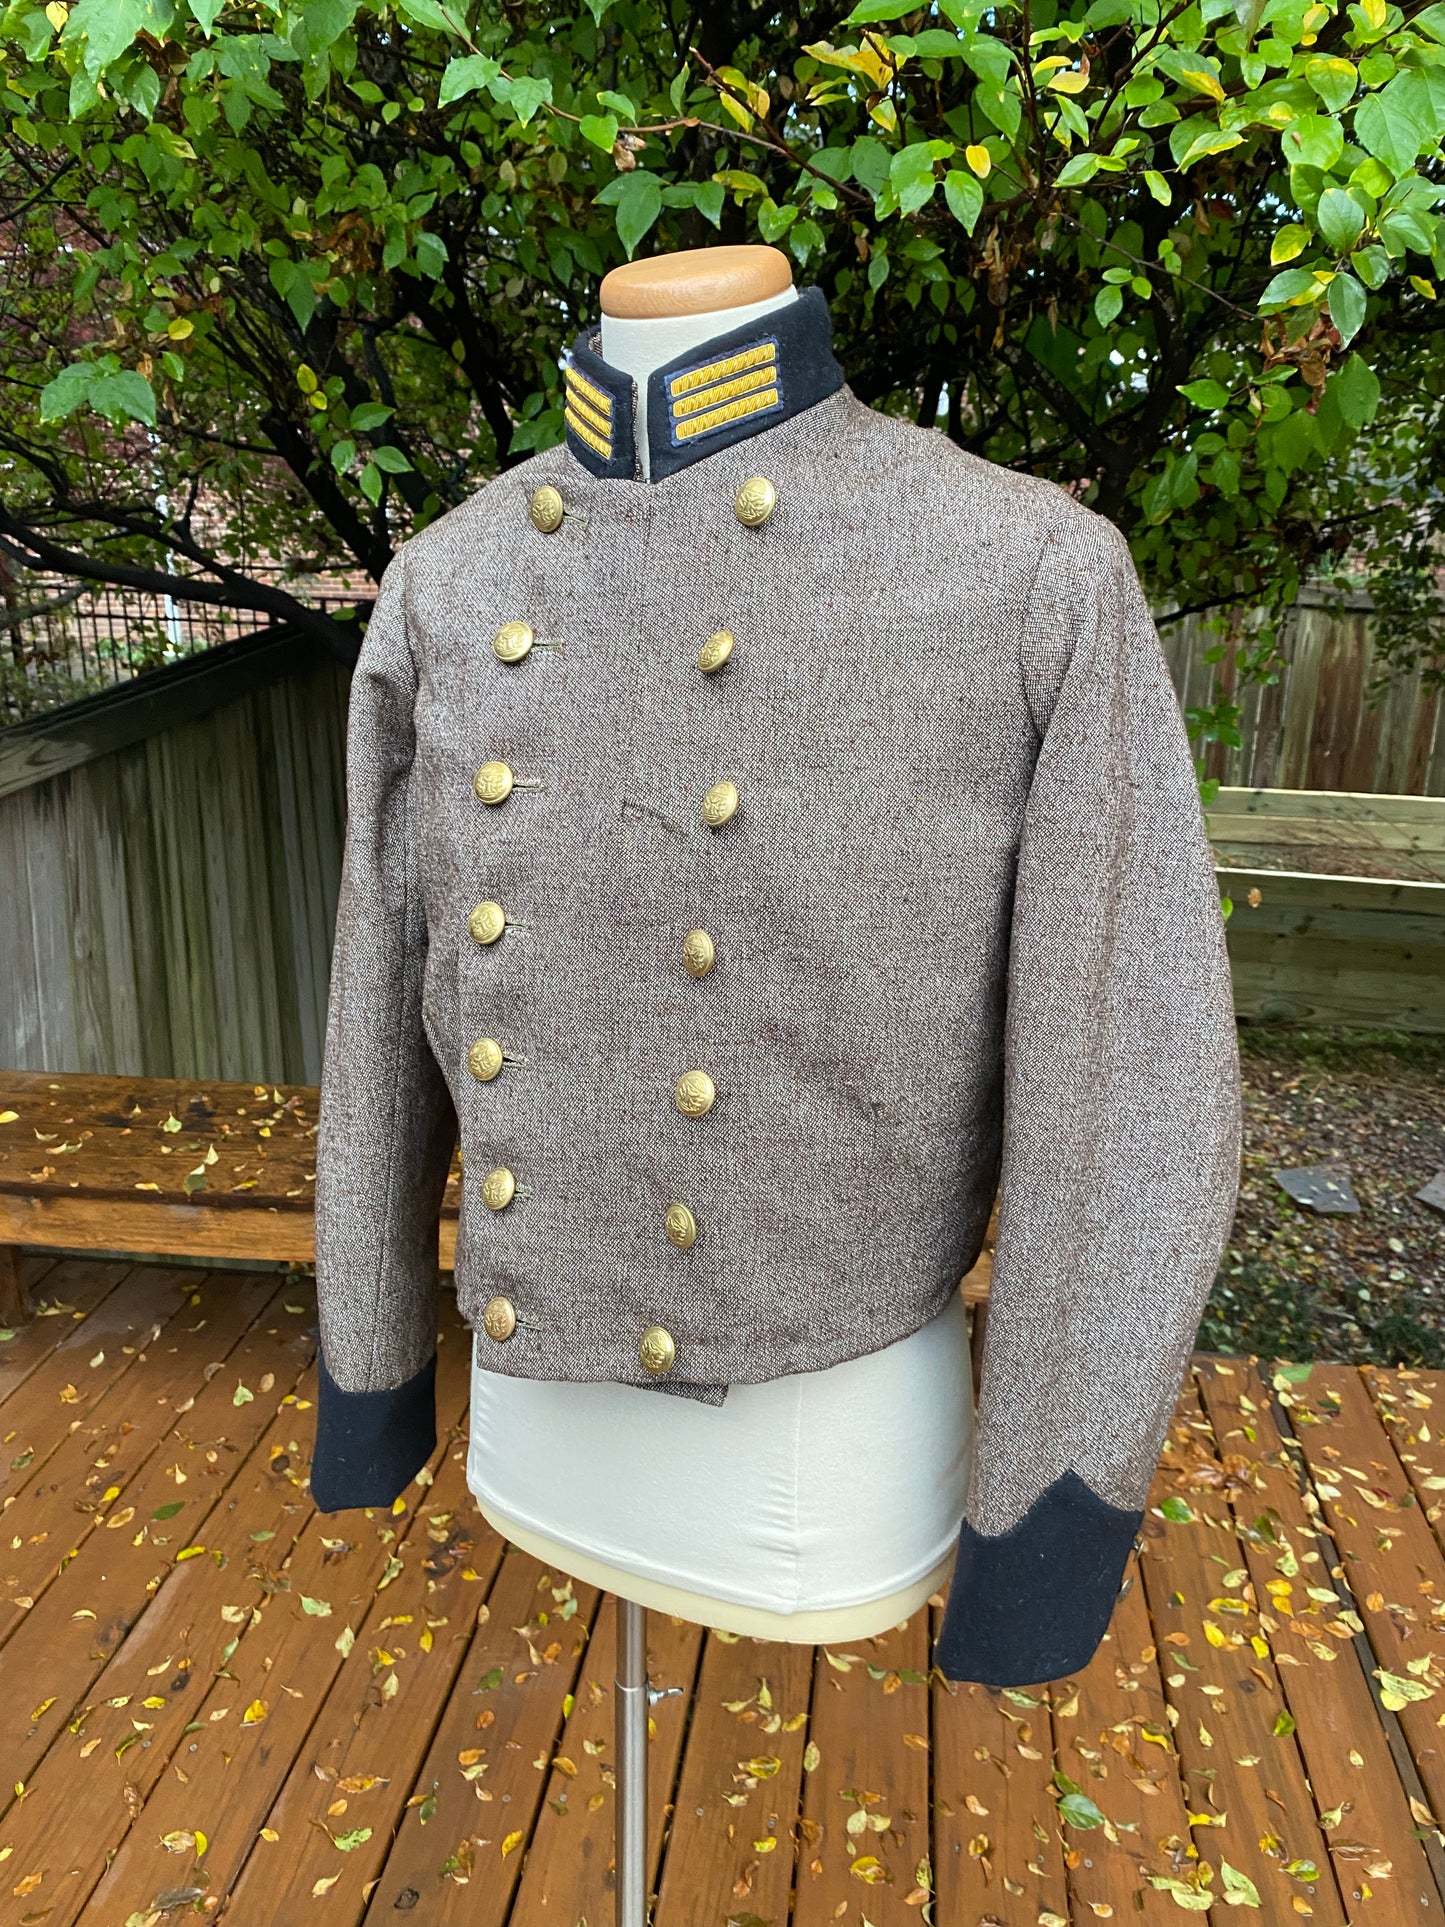 Confederate Officer Double-Breasted Shell Jacket